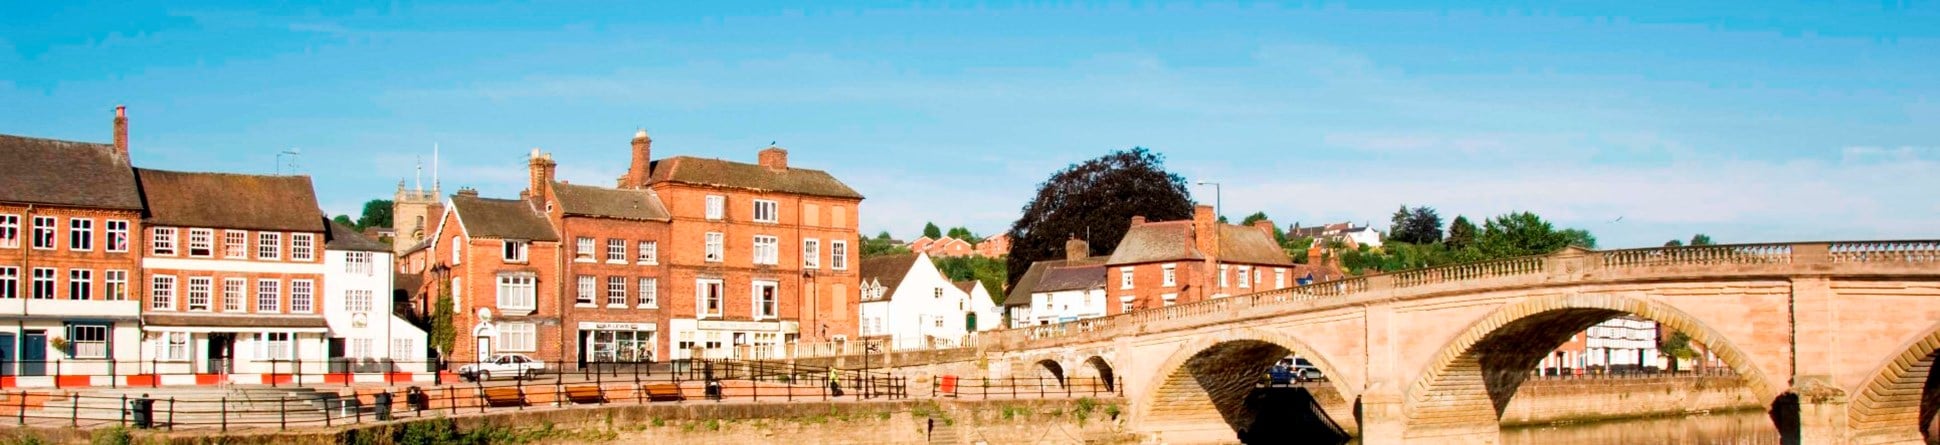 The Riverside at Bewley, Worcestershire